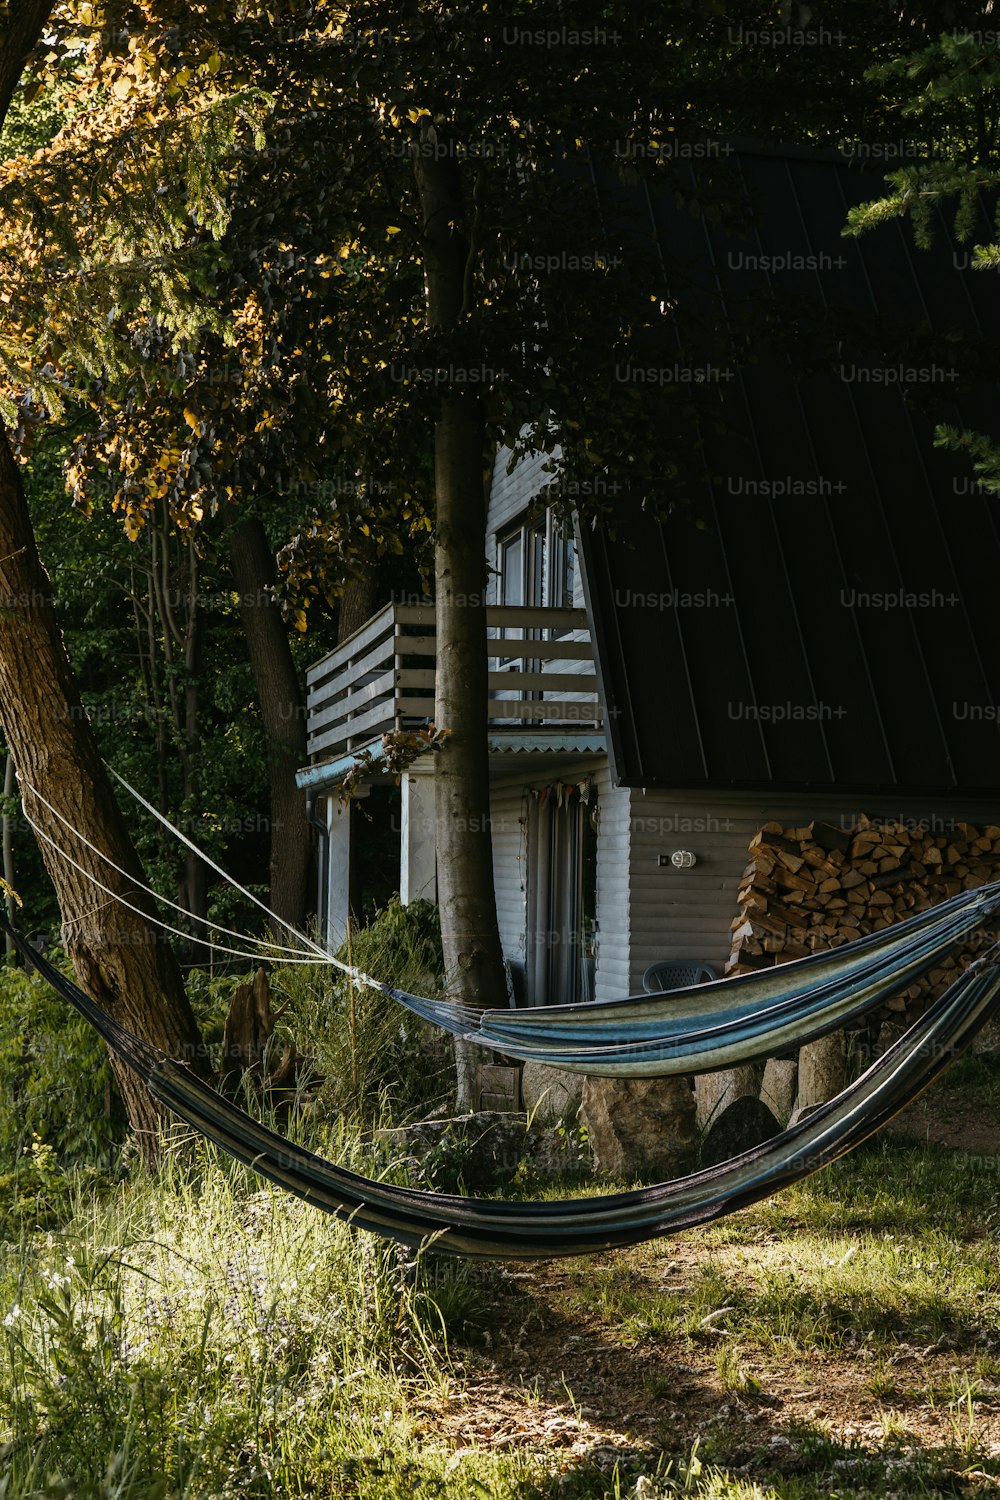 a hammock hanging from a tree in front of a house